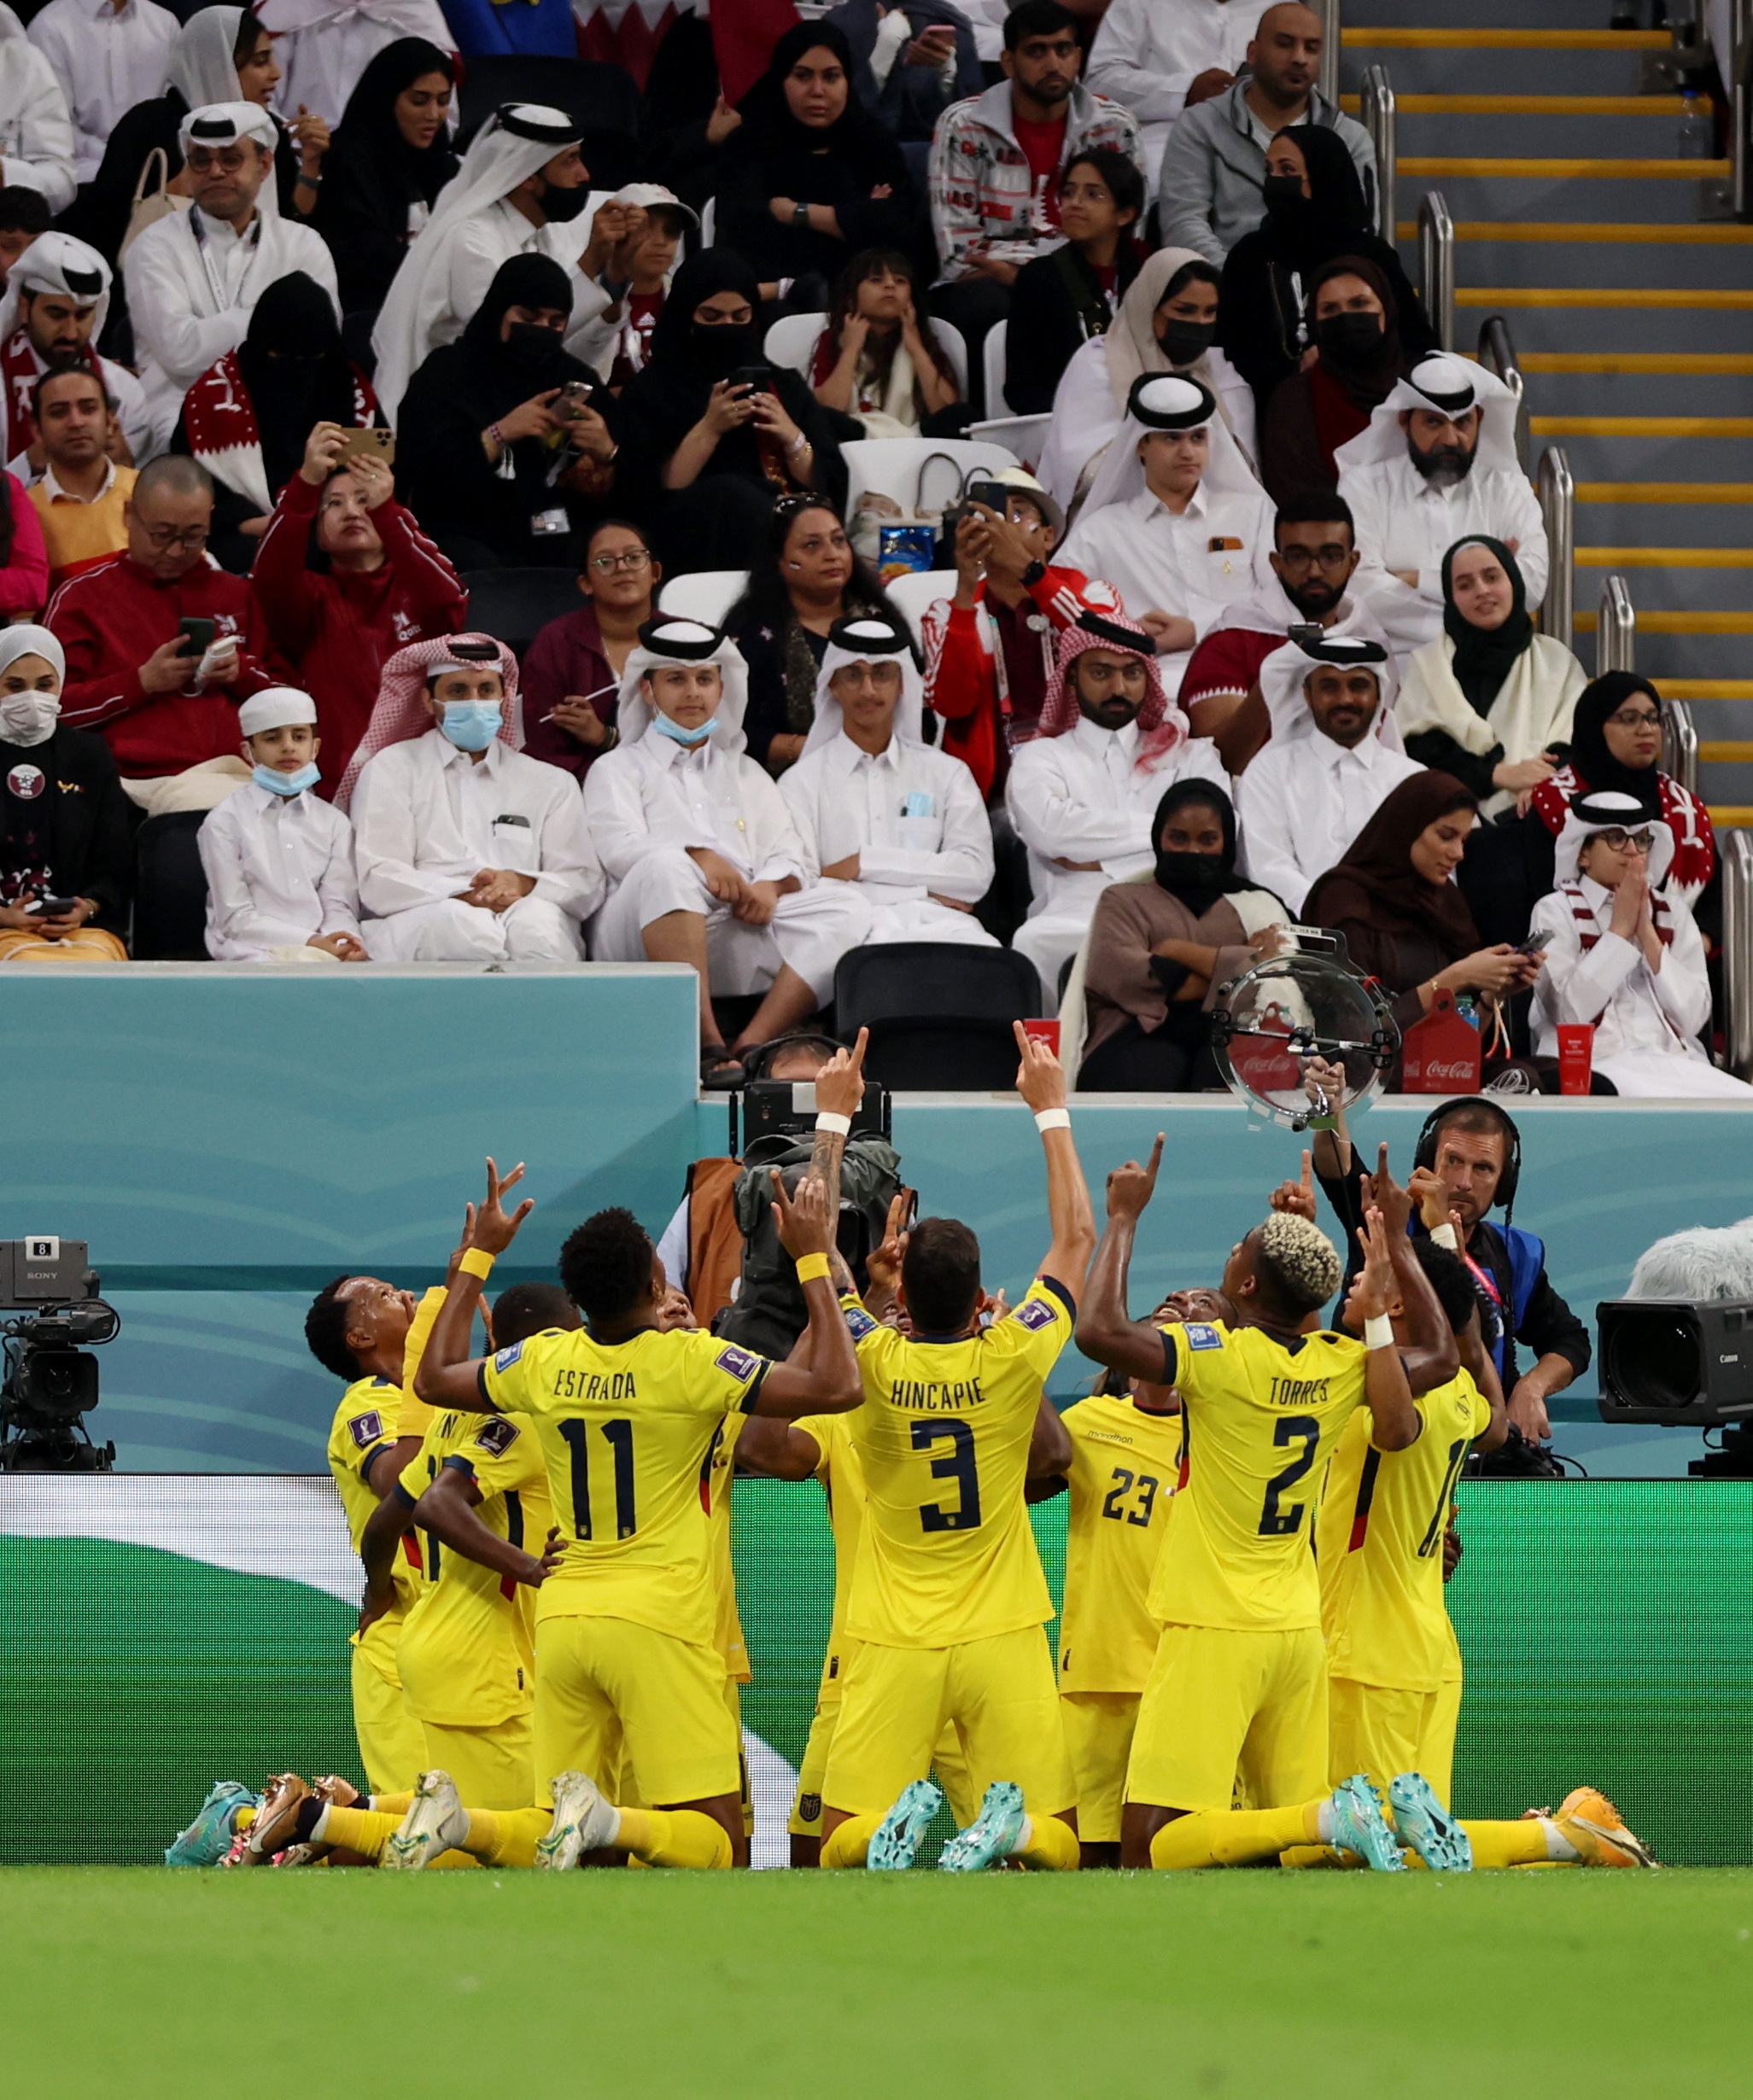 The celebration of the Ecuadorian players at the Al Bayt Stadium (REUTERS / Matthew Childs)